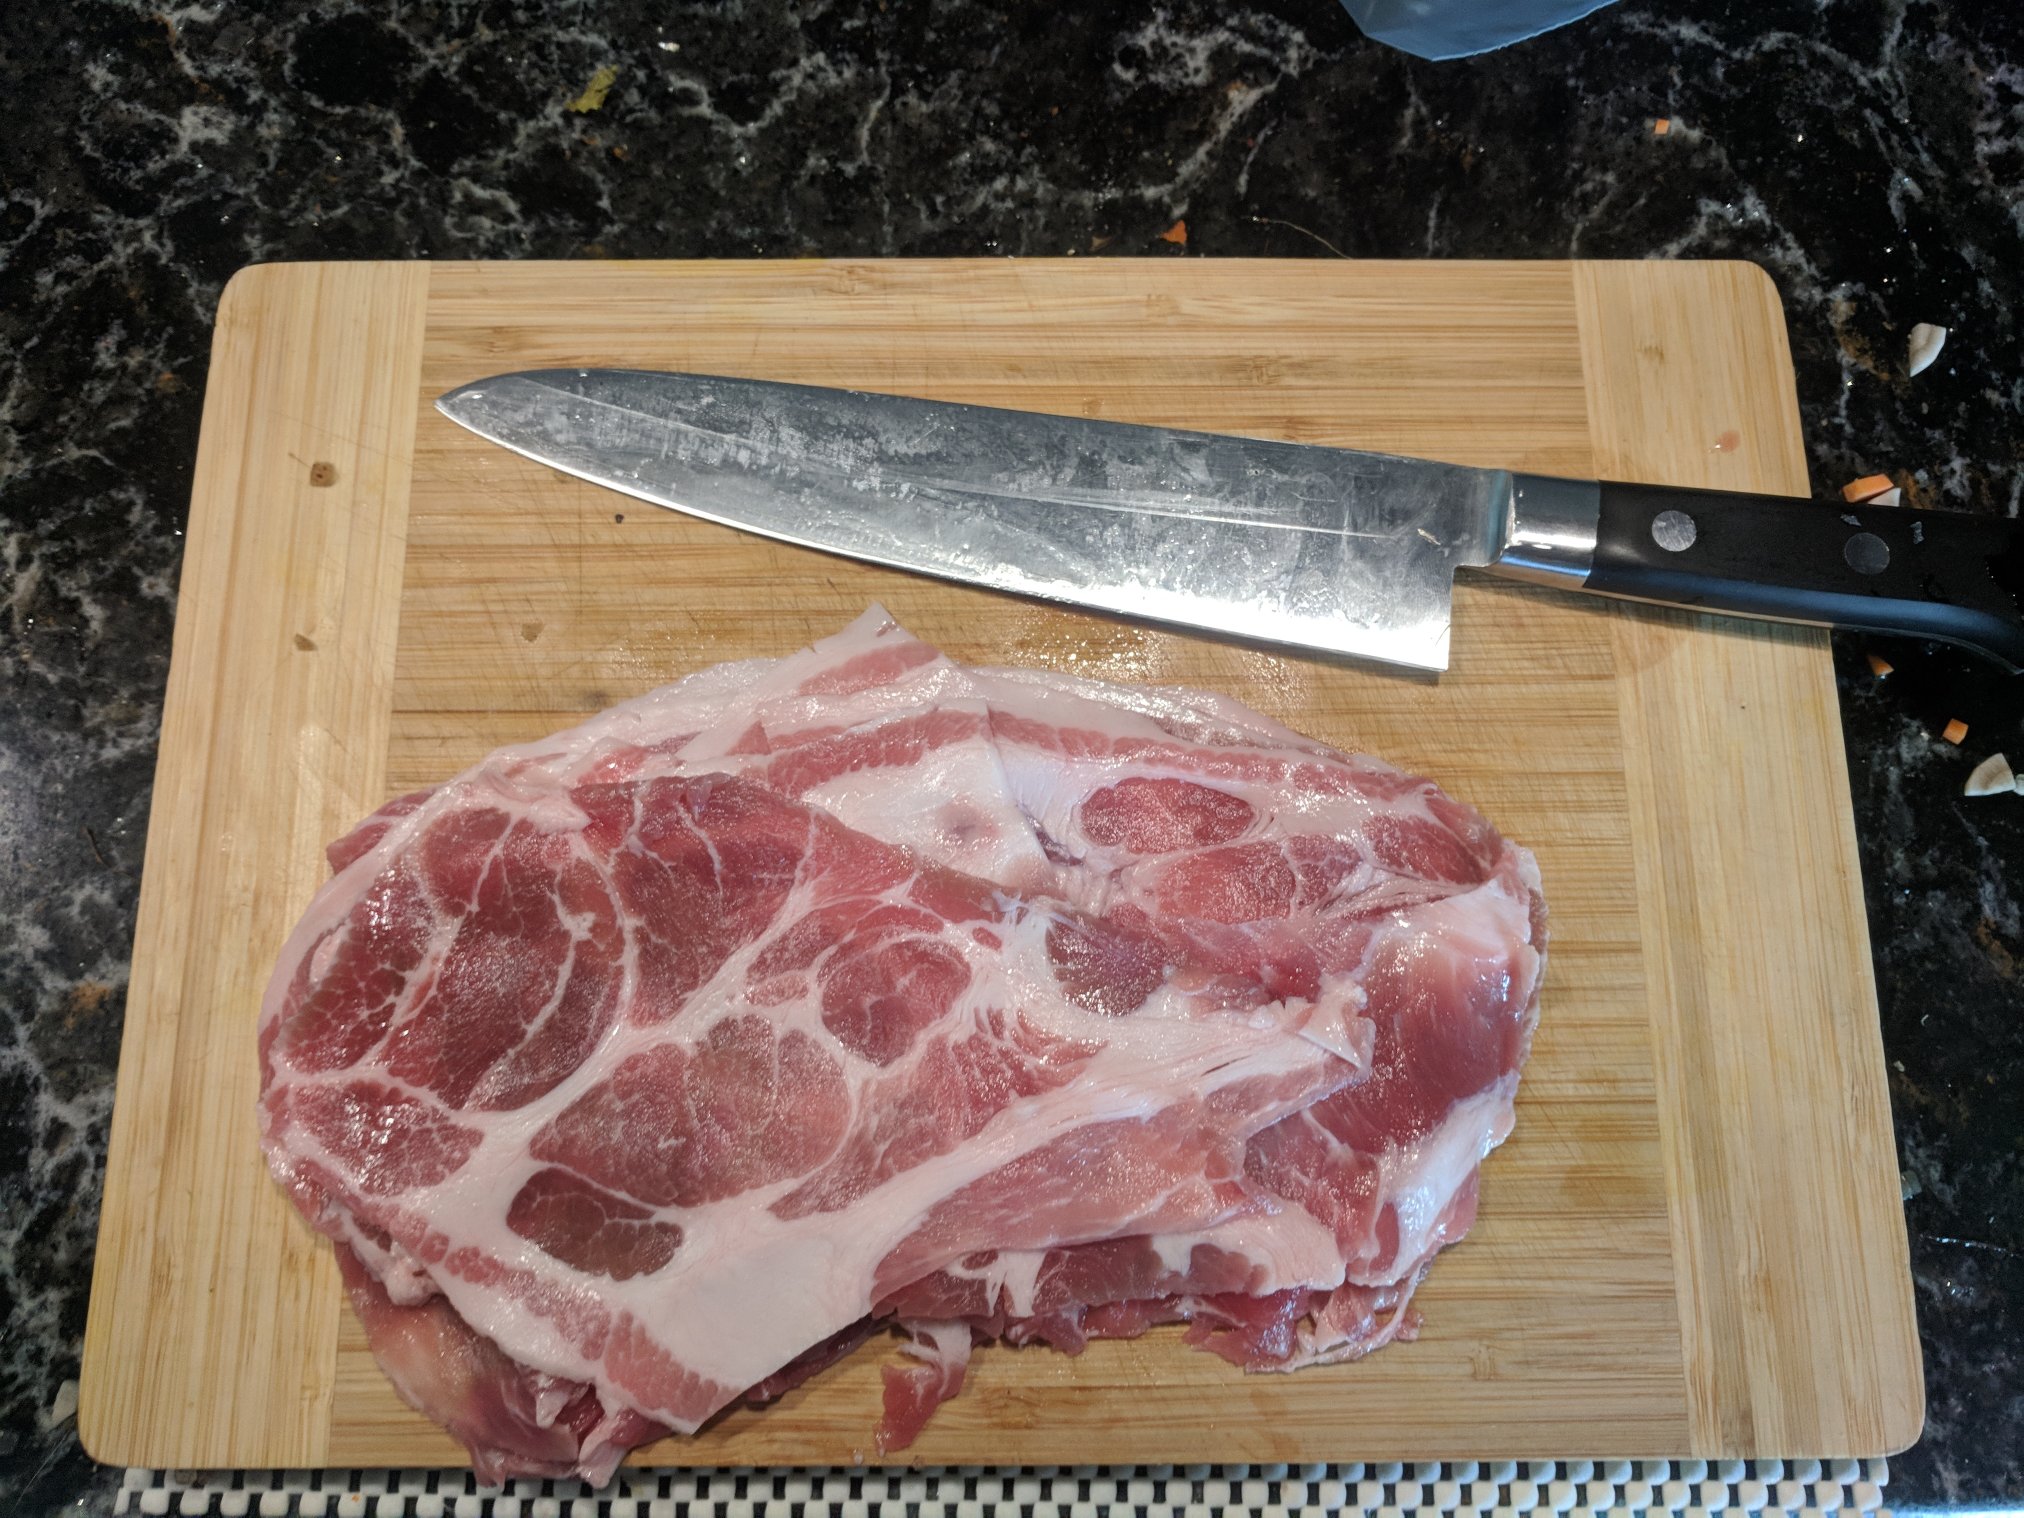 Meat to slice